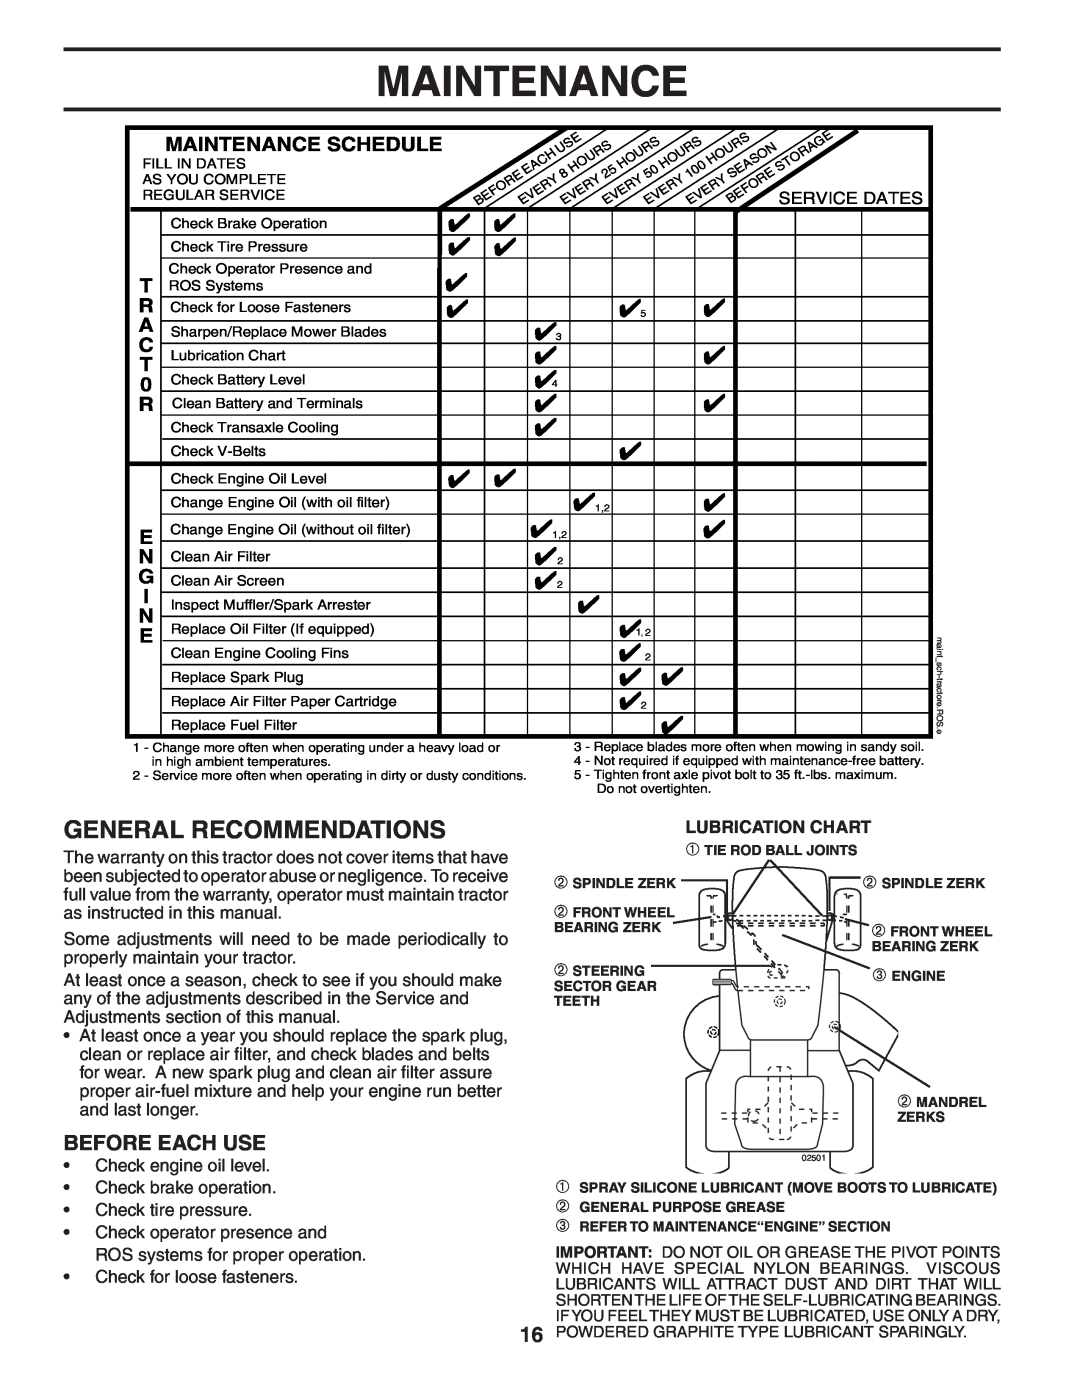 Poulan PKGTH2554 manual General Recommendations, Before Each Use, Maintenance Schedule 